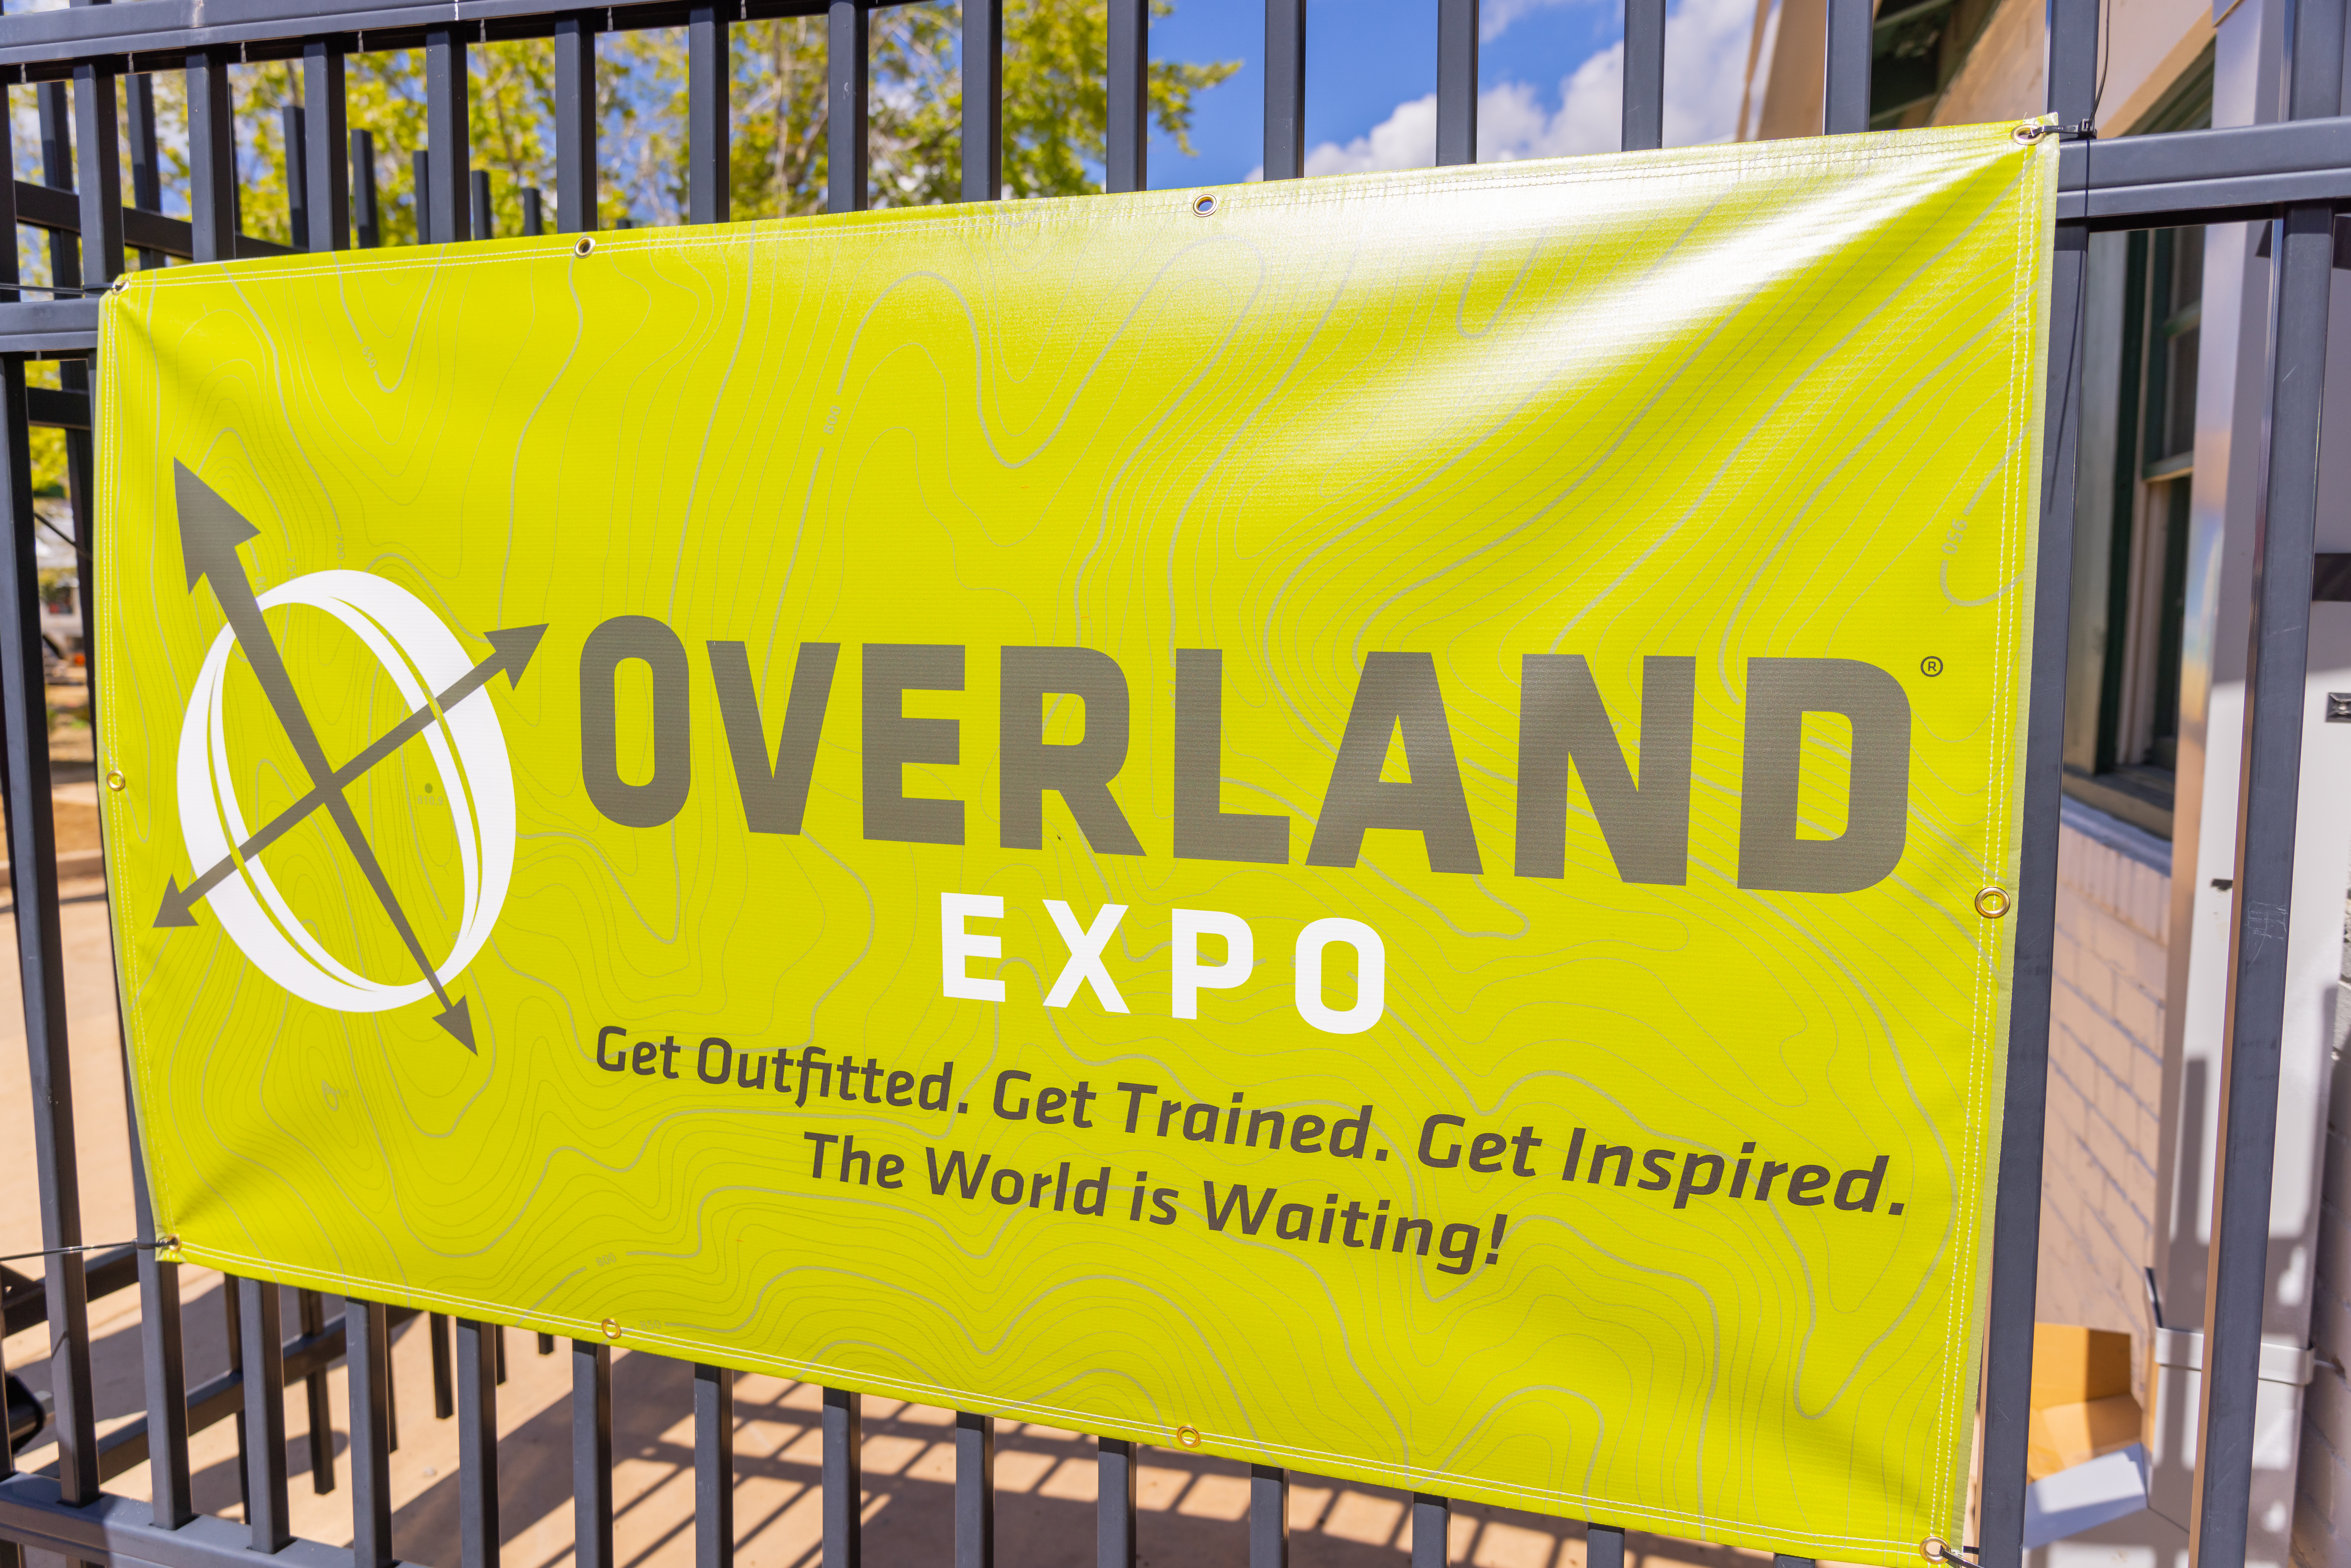 Overland Expo sign at the event